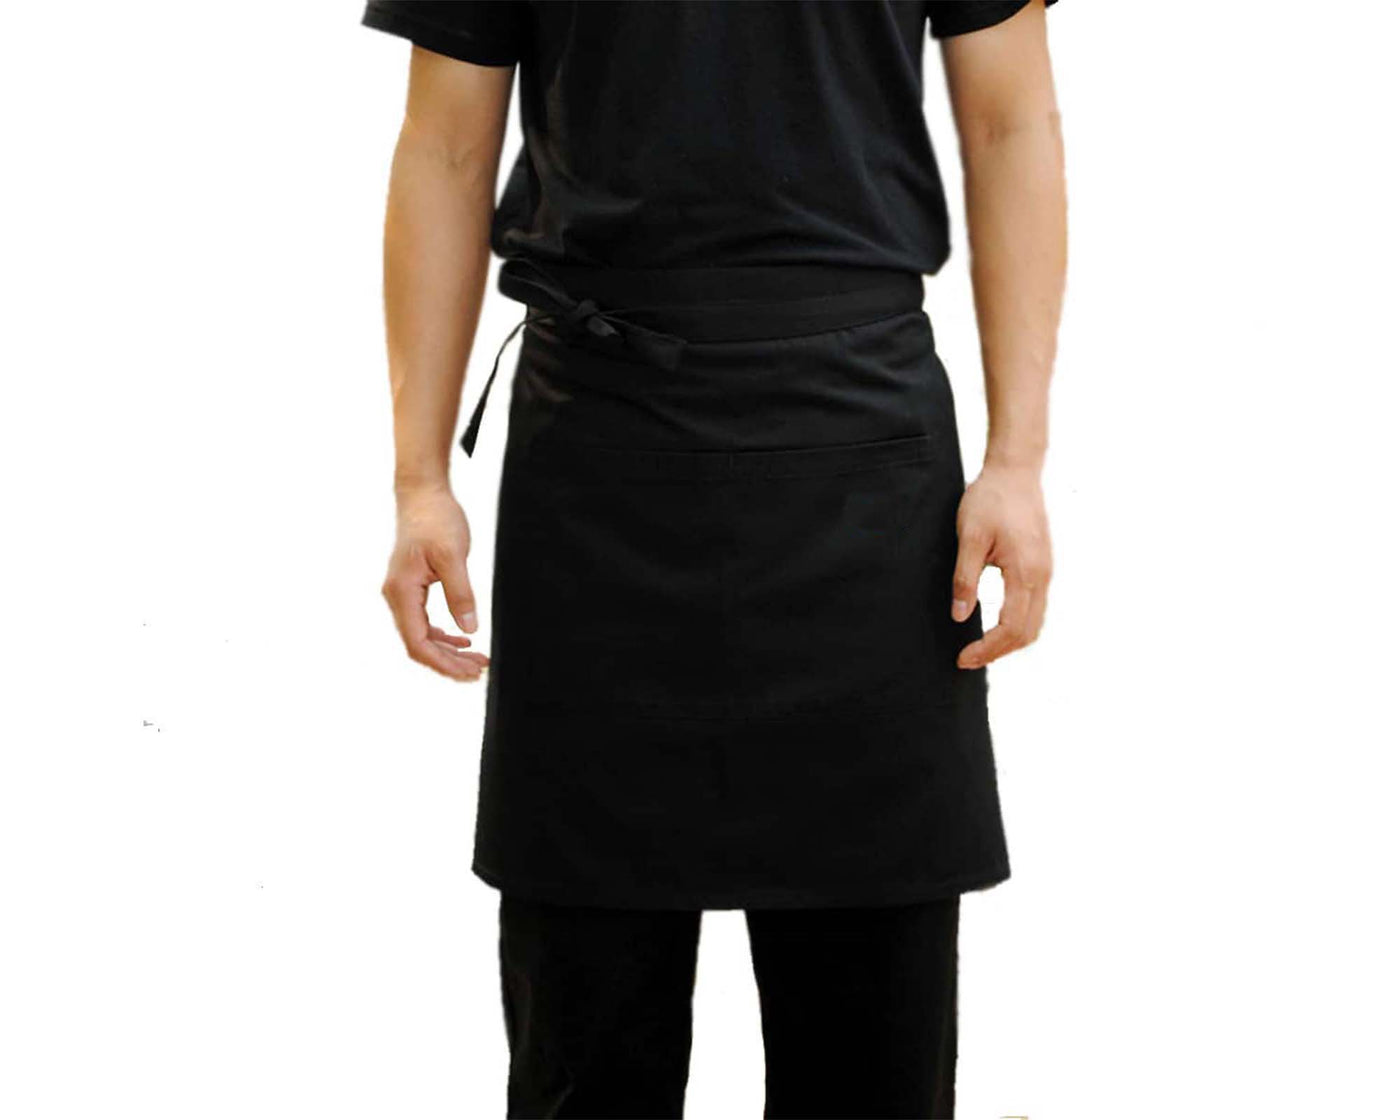 A person is wearing IHOP Apron without logo,  Showing the apron how its folded up.